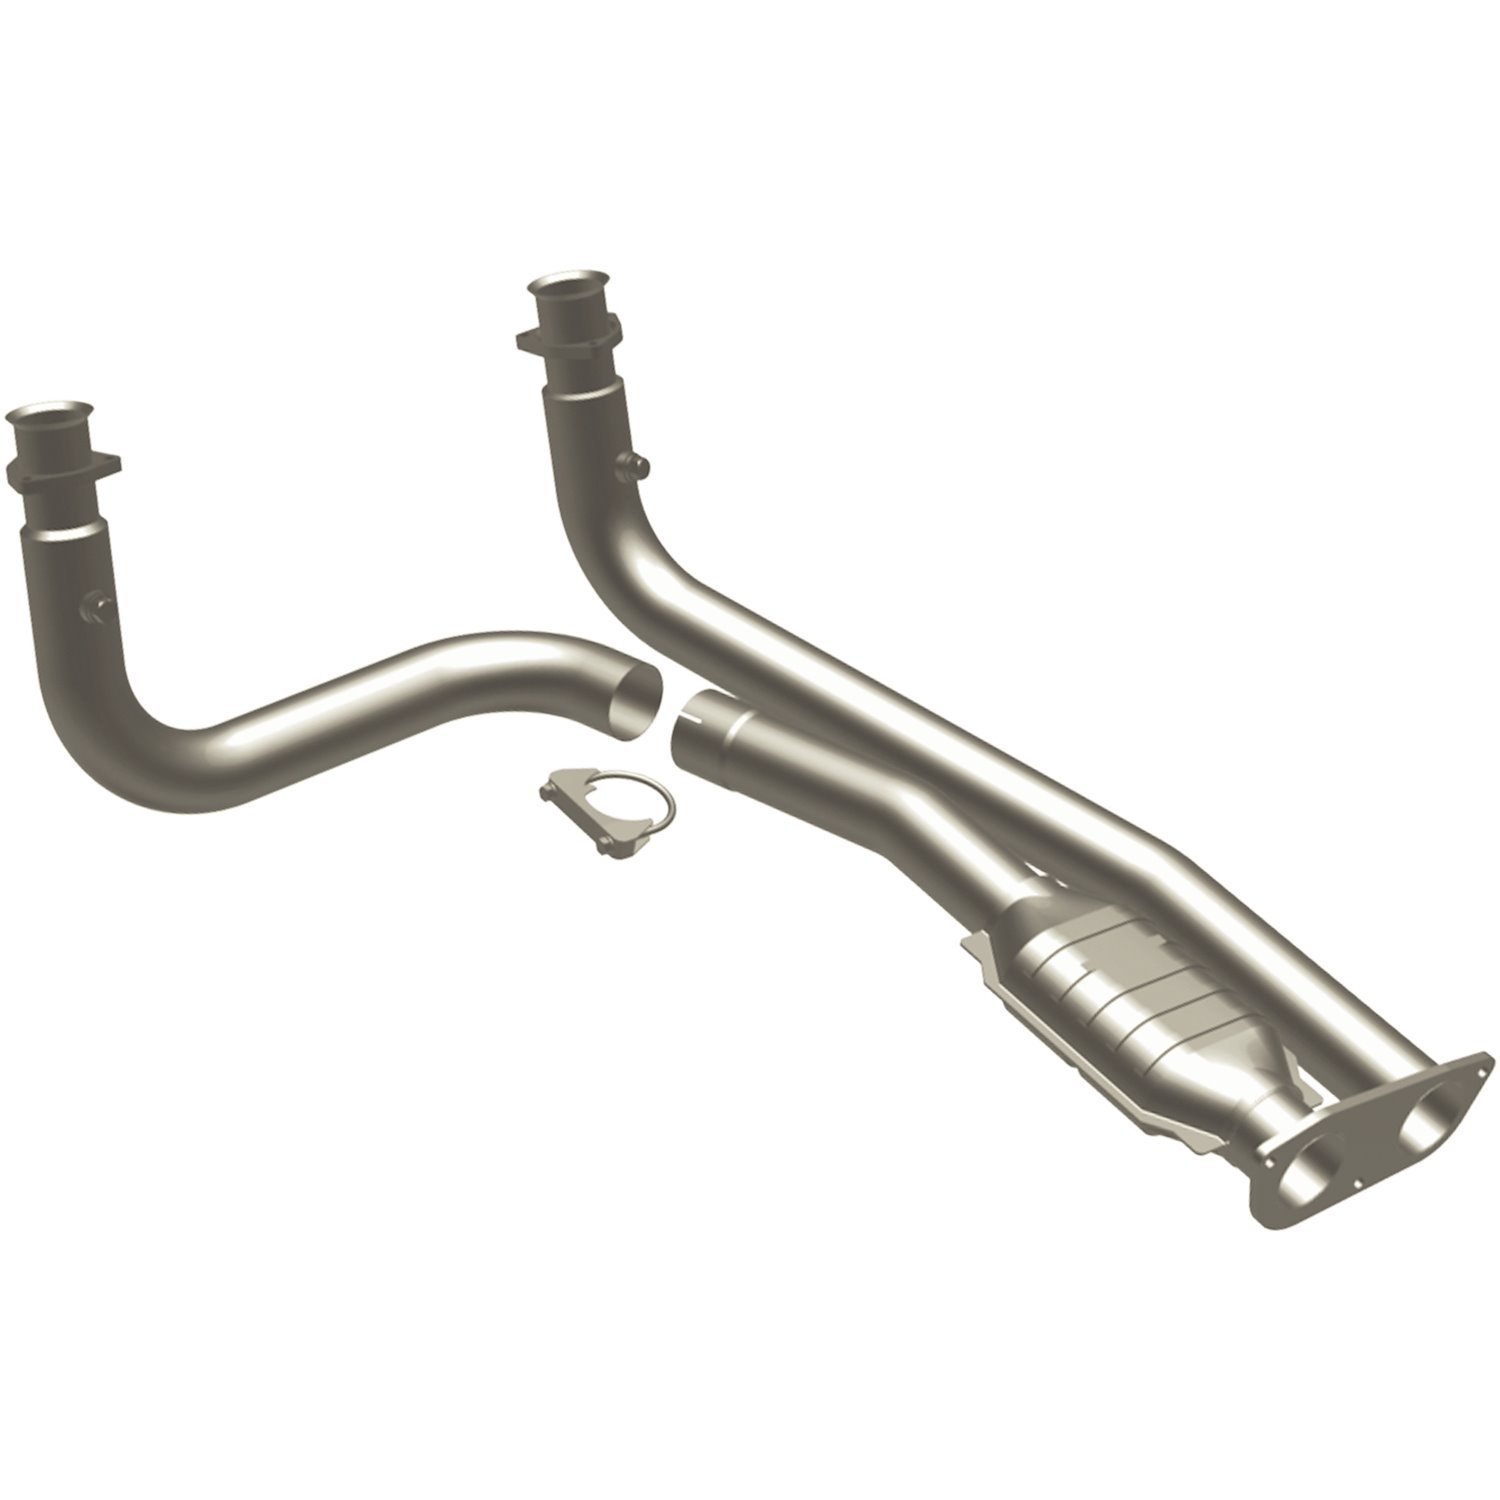 Direct-Fit Catalytic Converter 1996-99 Chevy/GMC Truck/Suburban 7.4L